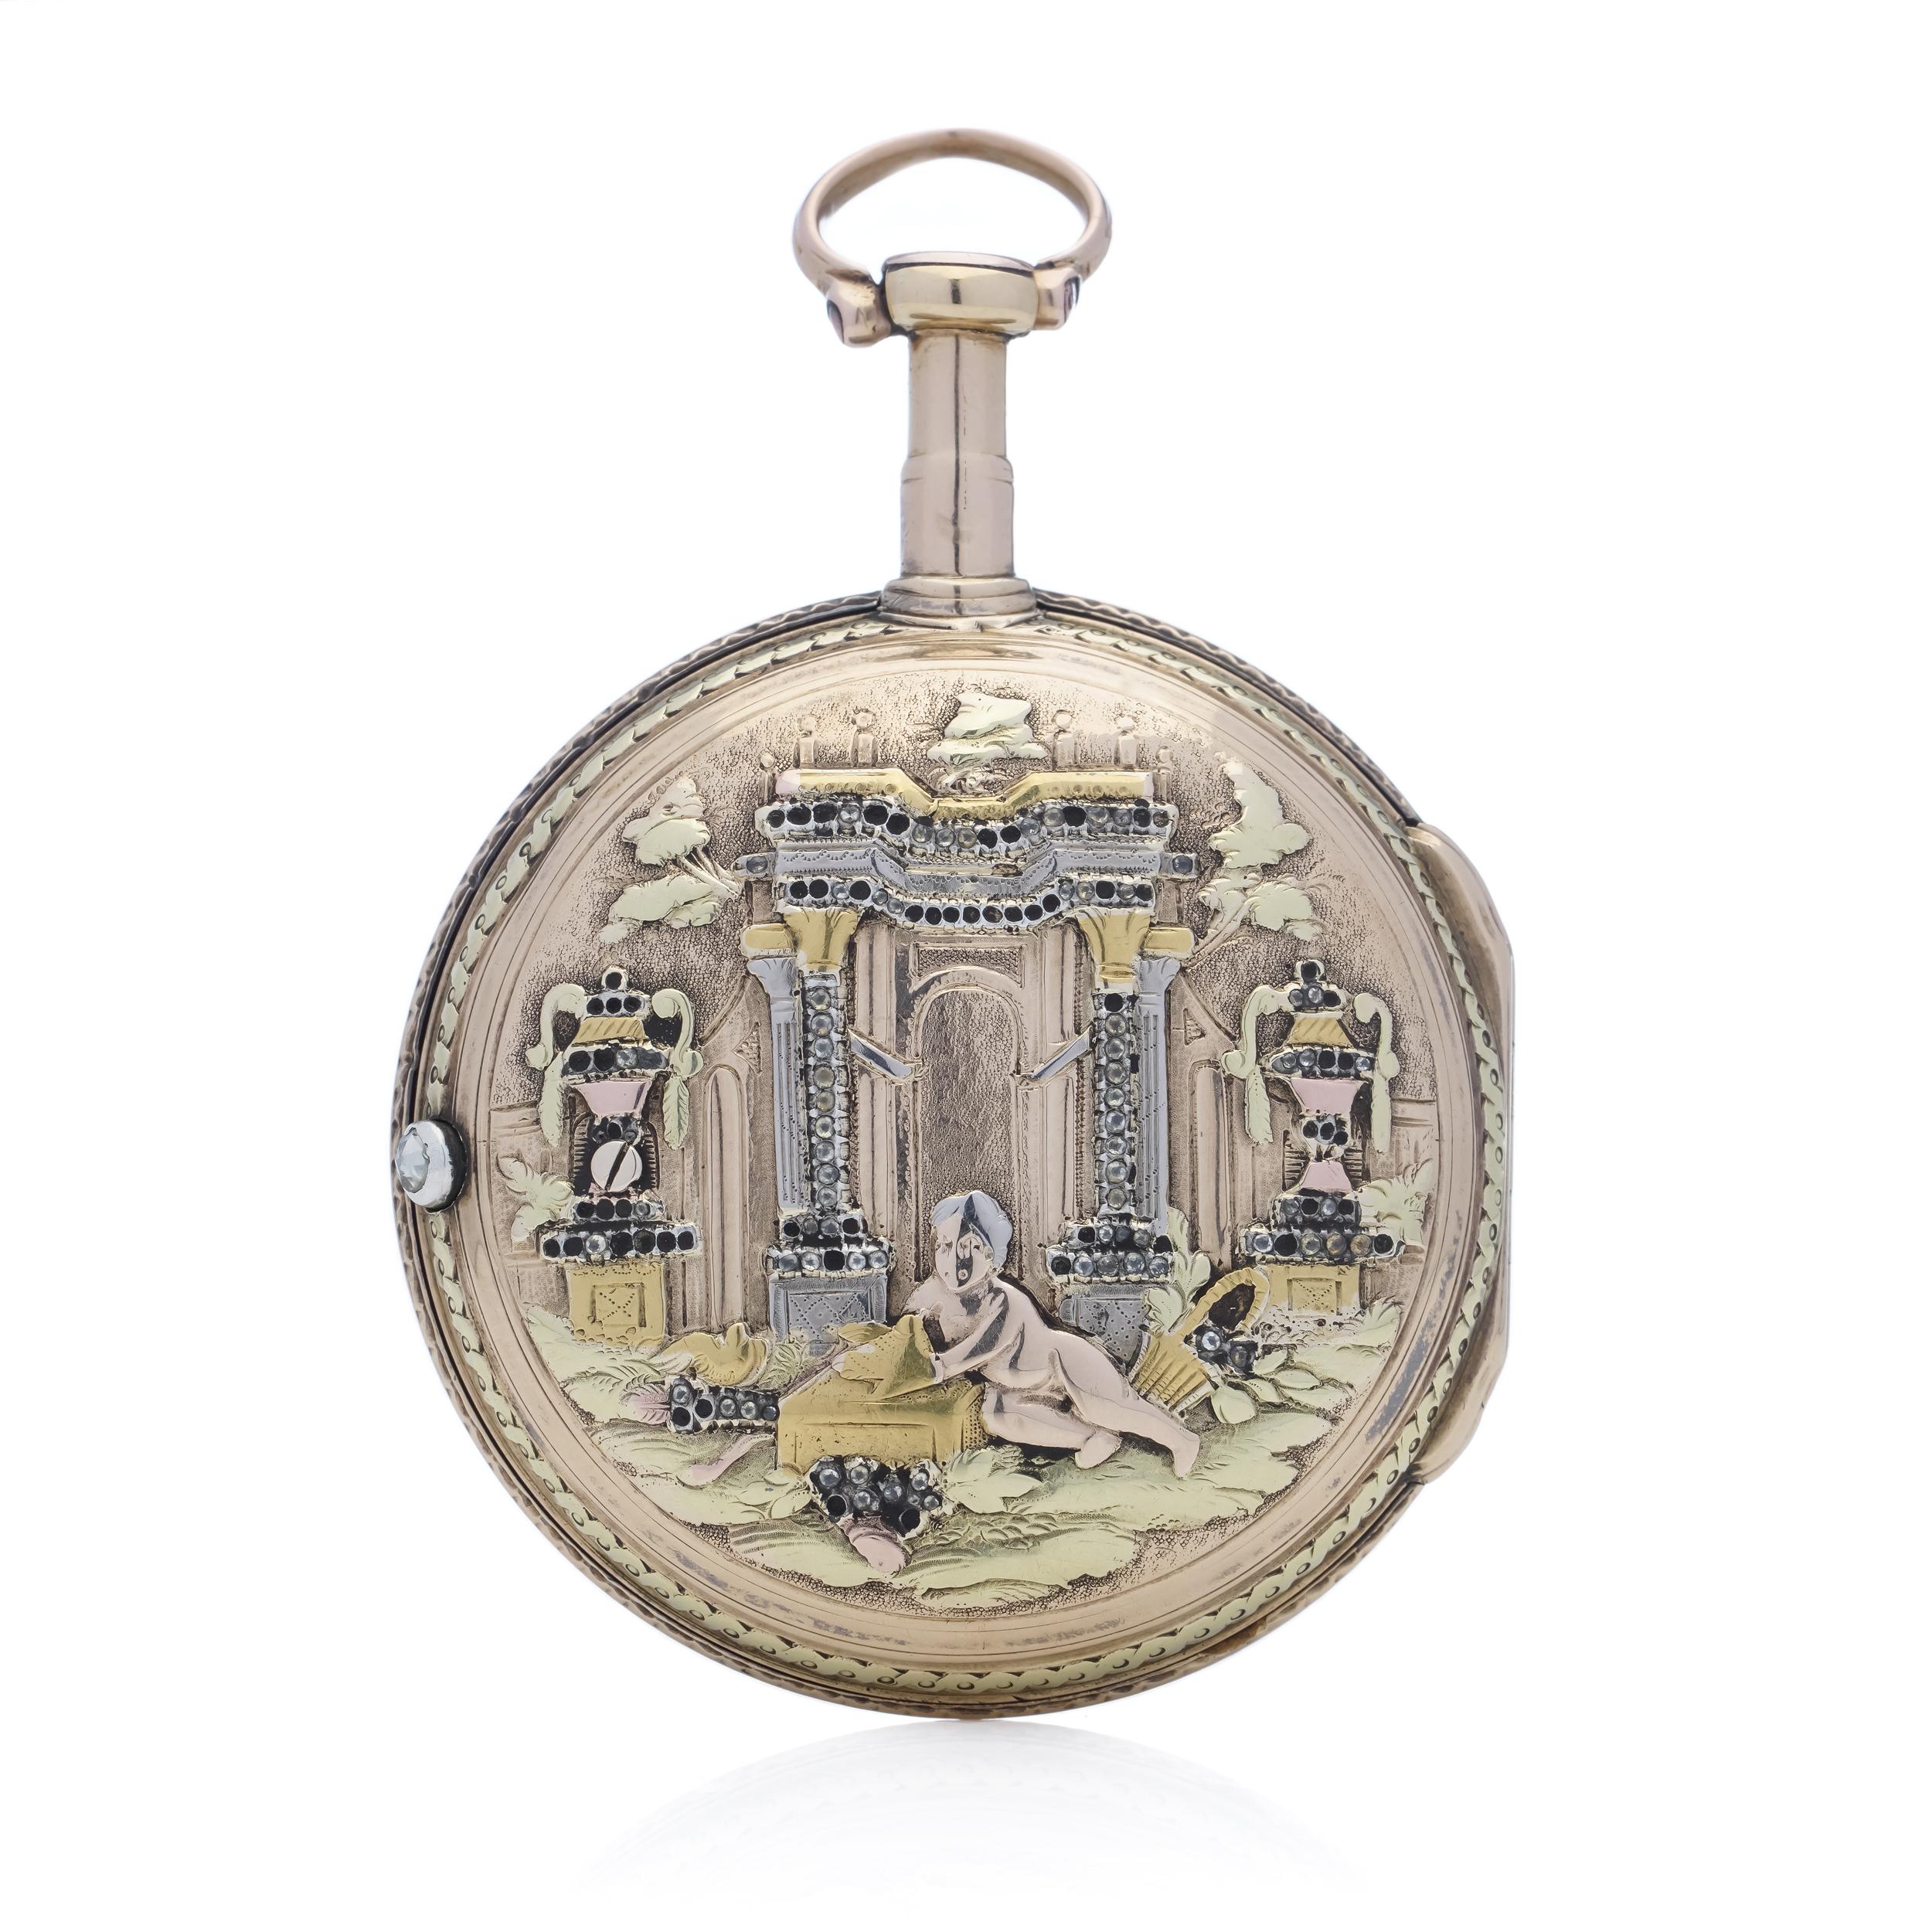 Antique 18th-century Verge Fusee Key wind 18kt gold and Silver pocket watch, decorated with Repoussé metal work and paste case. 

Made in France, 18th Century. 

Details:
Country: France
Circa Date: 1790's 
Case size: 40 mm 
Style: Open Face,